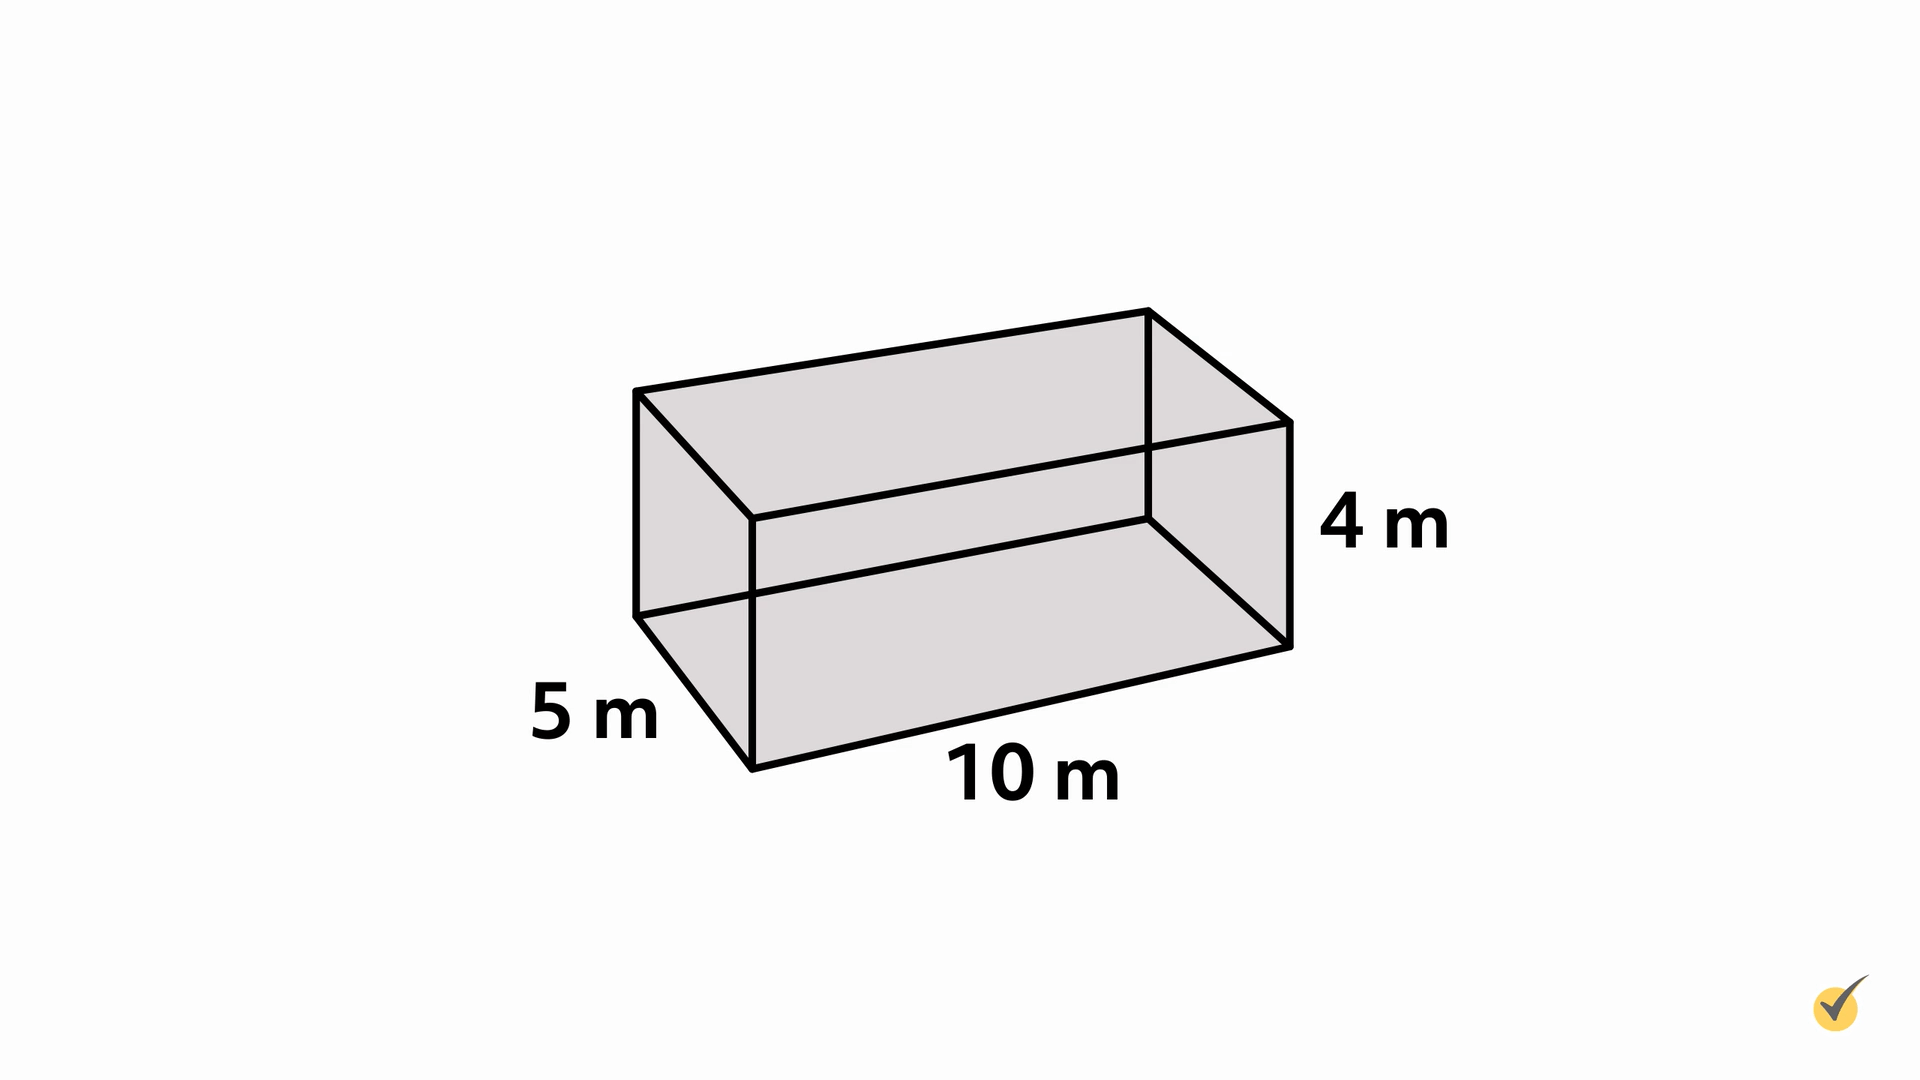 image of cubed prism 10m by 5m by 4m.